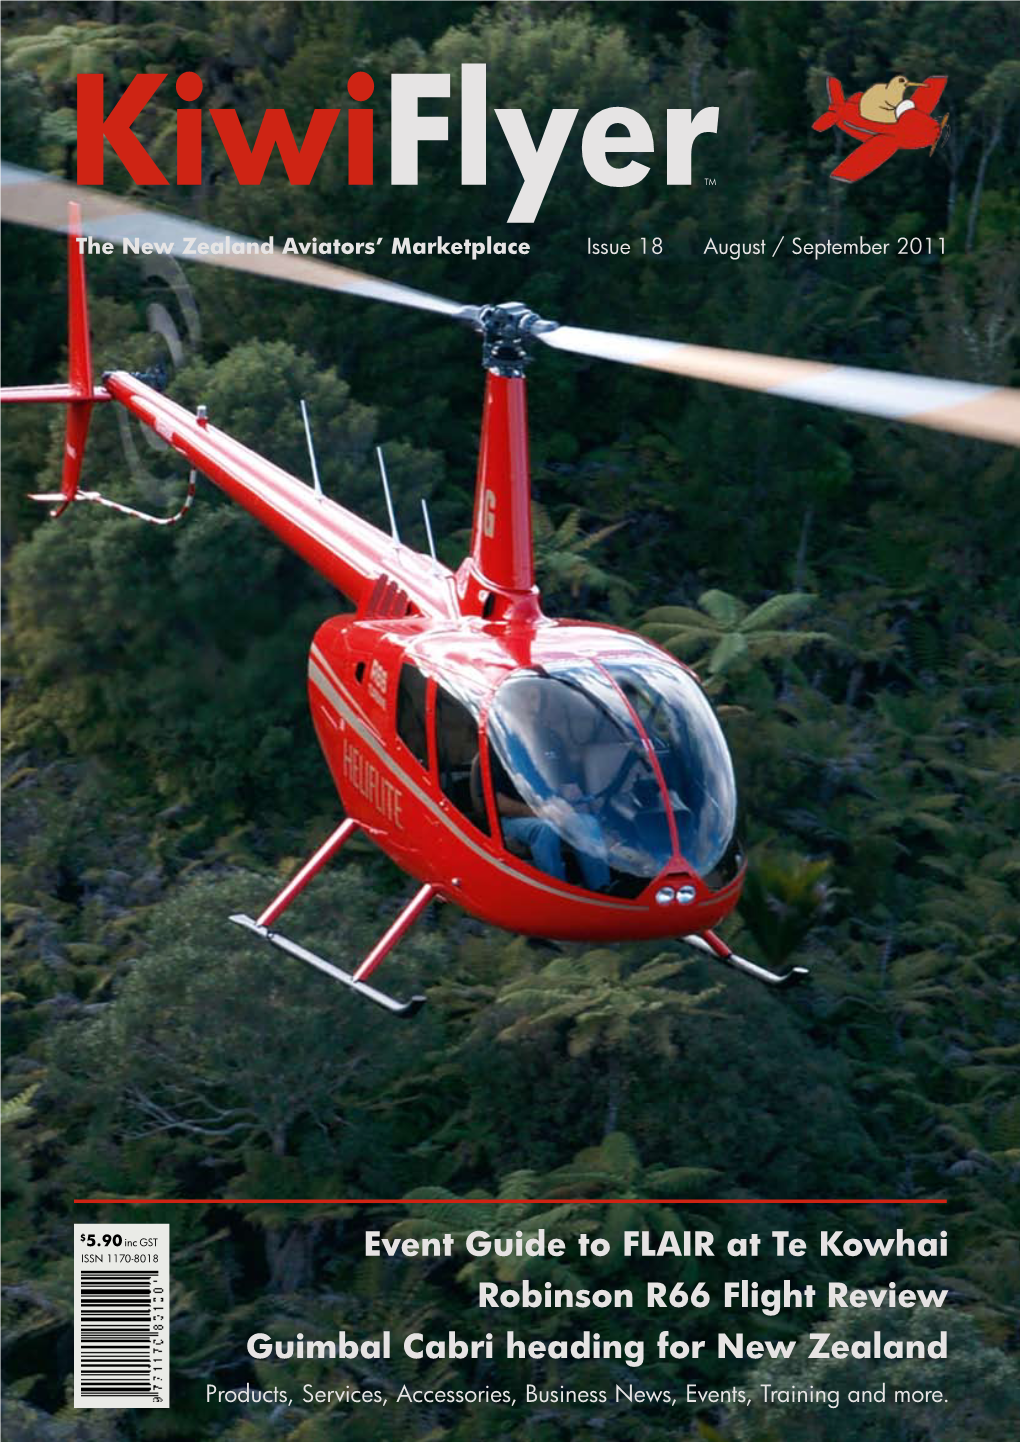 Event Guide to FLAIR at Te Kowhai Robinson R66 Flight Review Guimbal Cabri Heading for New Zealand